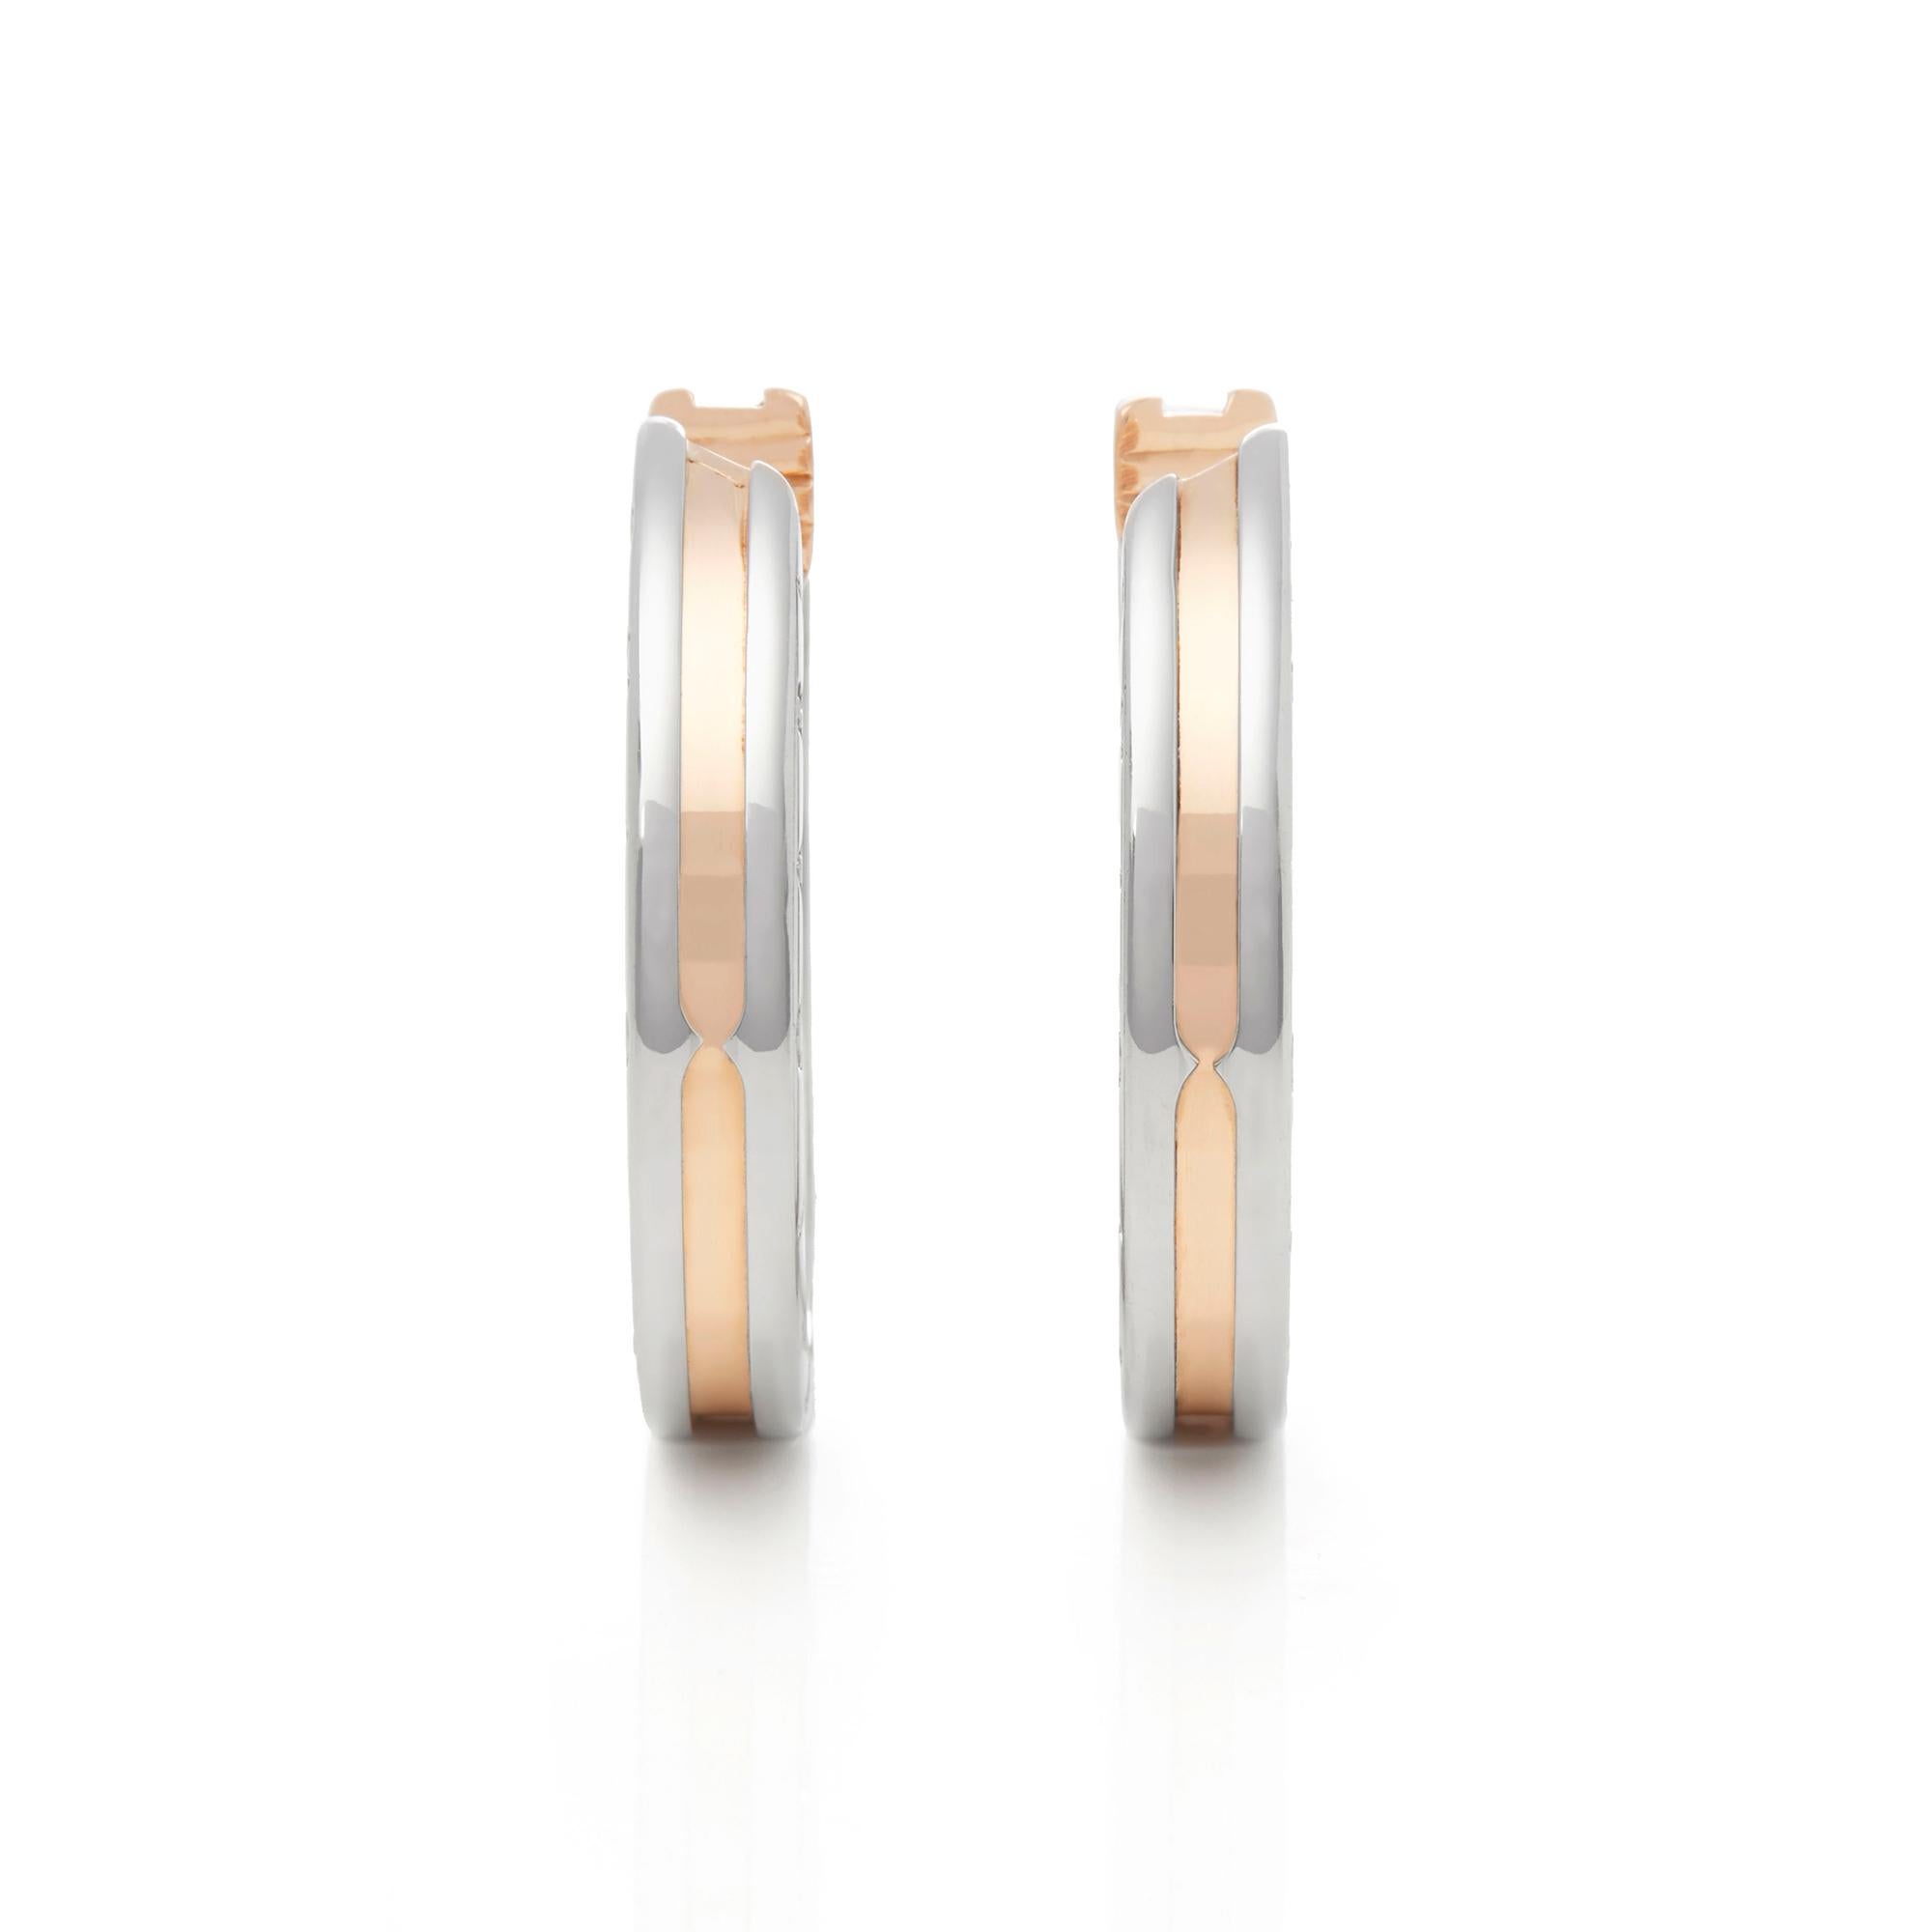 These Earrings by Bulgari are from their B.Zero 1 collection and features their signature Bulgari logo, made in 18k Rose Gold & Stainless Steel. These Earrings have secure latch backs. The total weight is 15.88 grams. Complete with Bulgari Box. 

